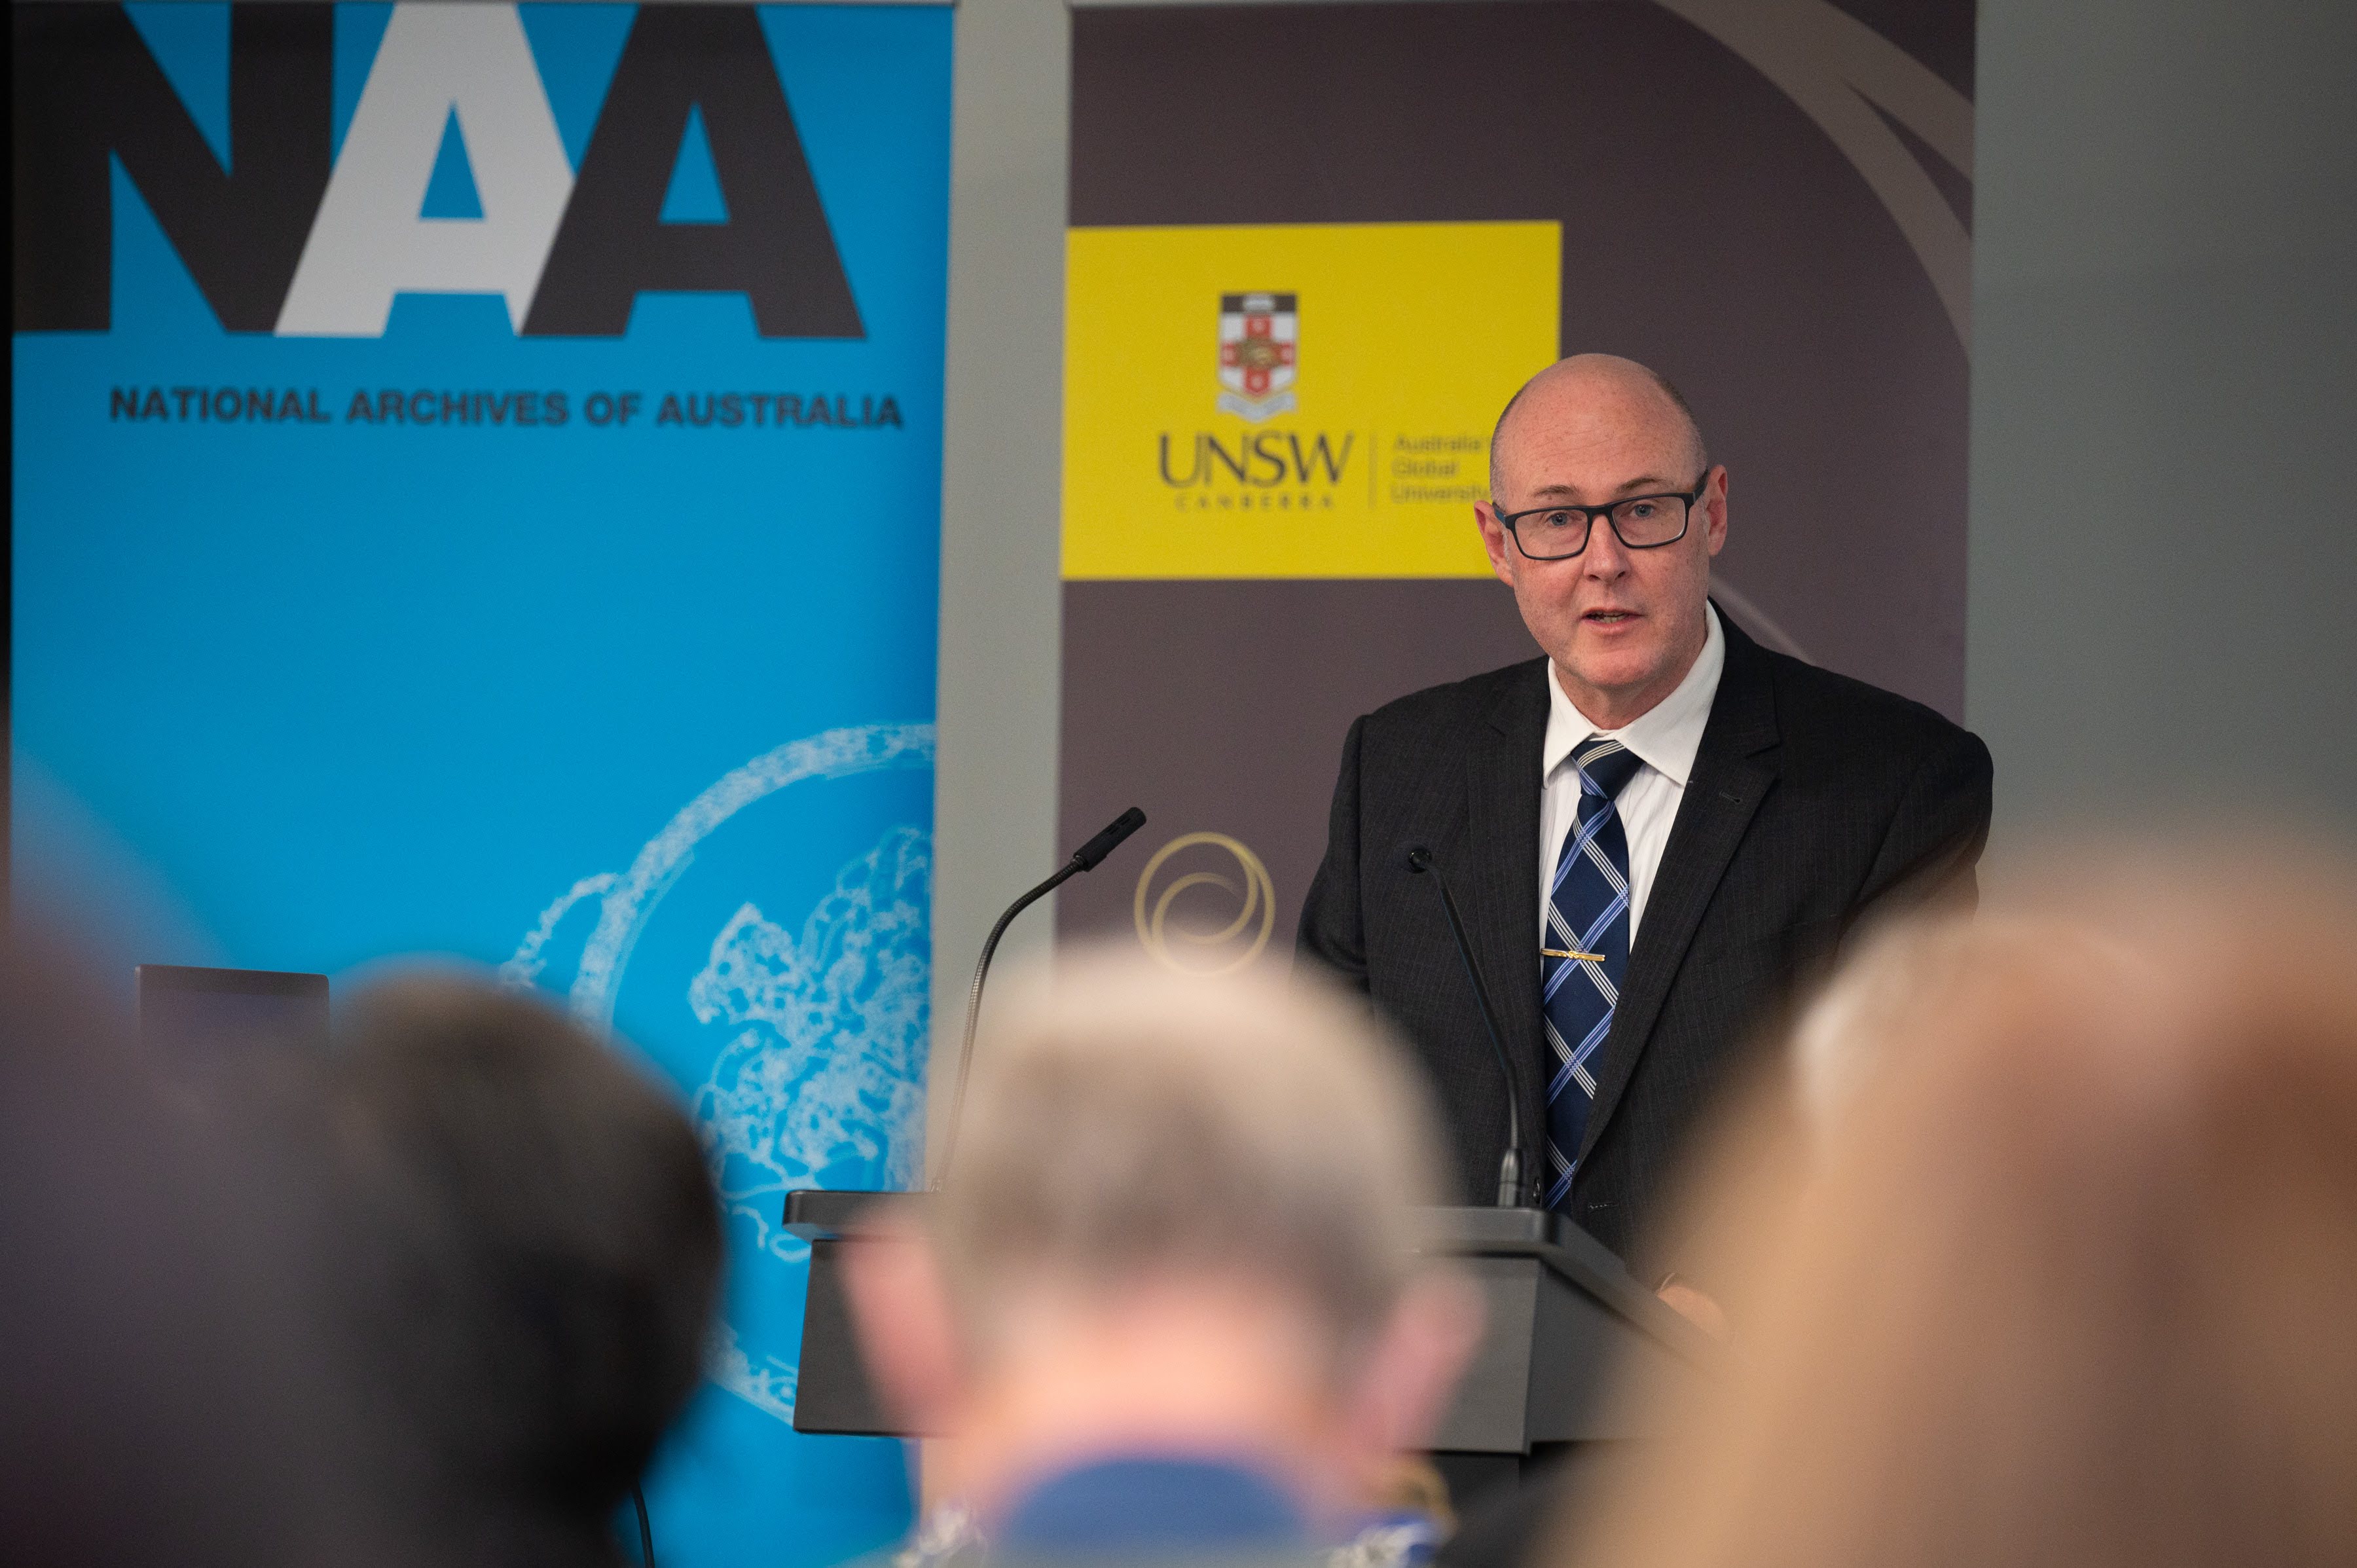 Professor Craig Stockings, UNSW Canberra  The John Howard Prime Ministerial Library in partnership with the National Archives of Australia hosts an evening with Sir Anthony Seldon